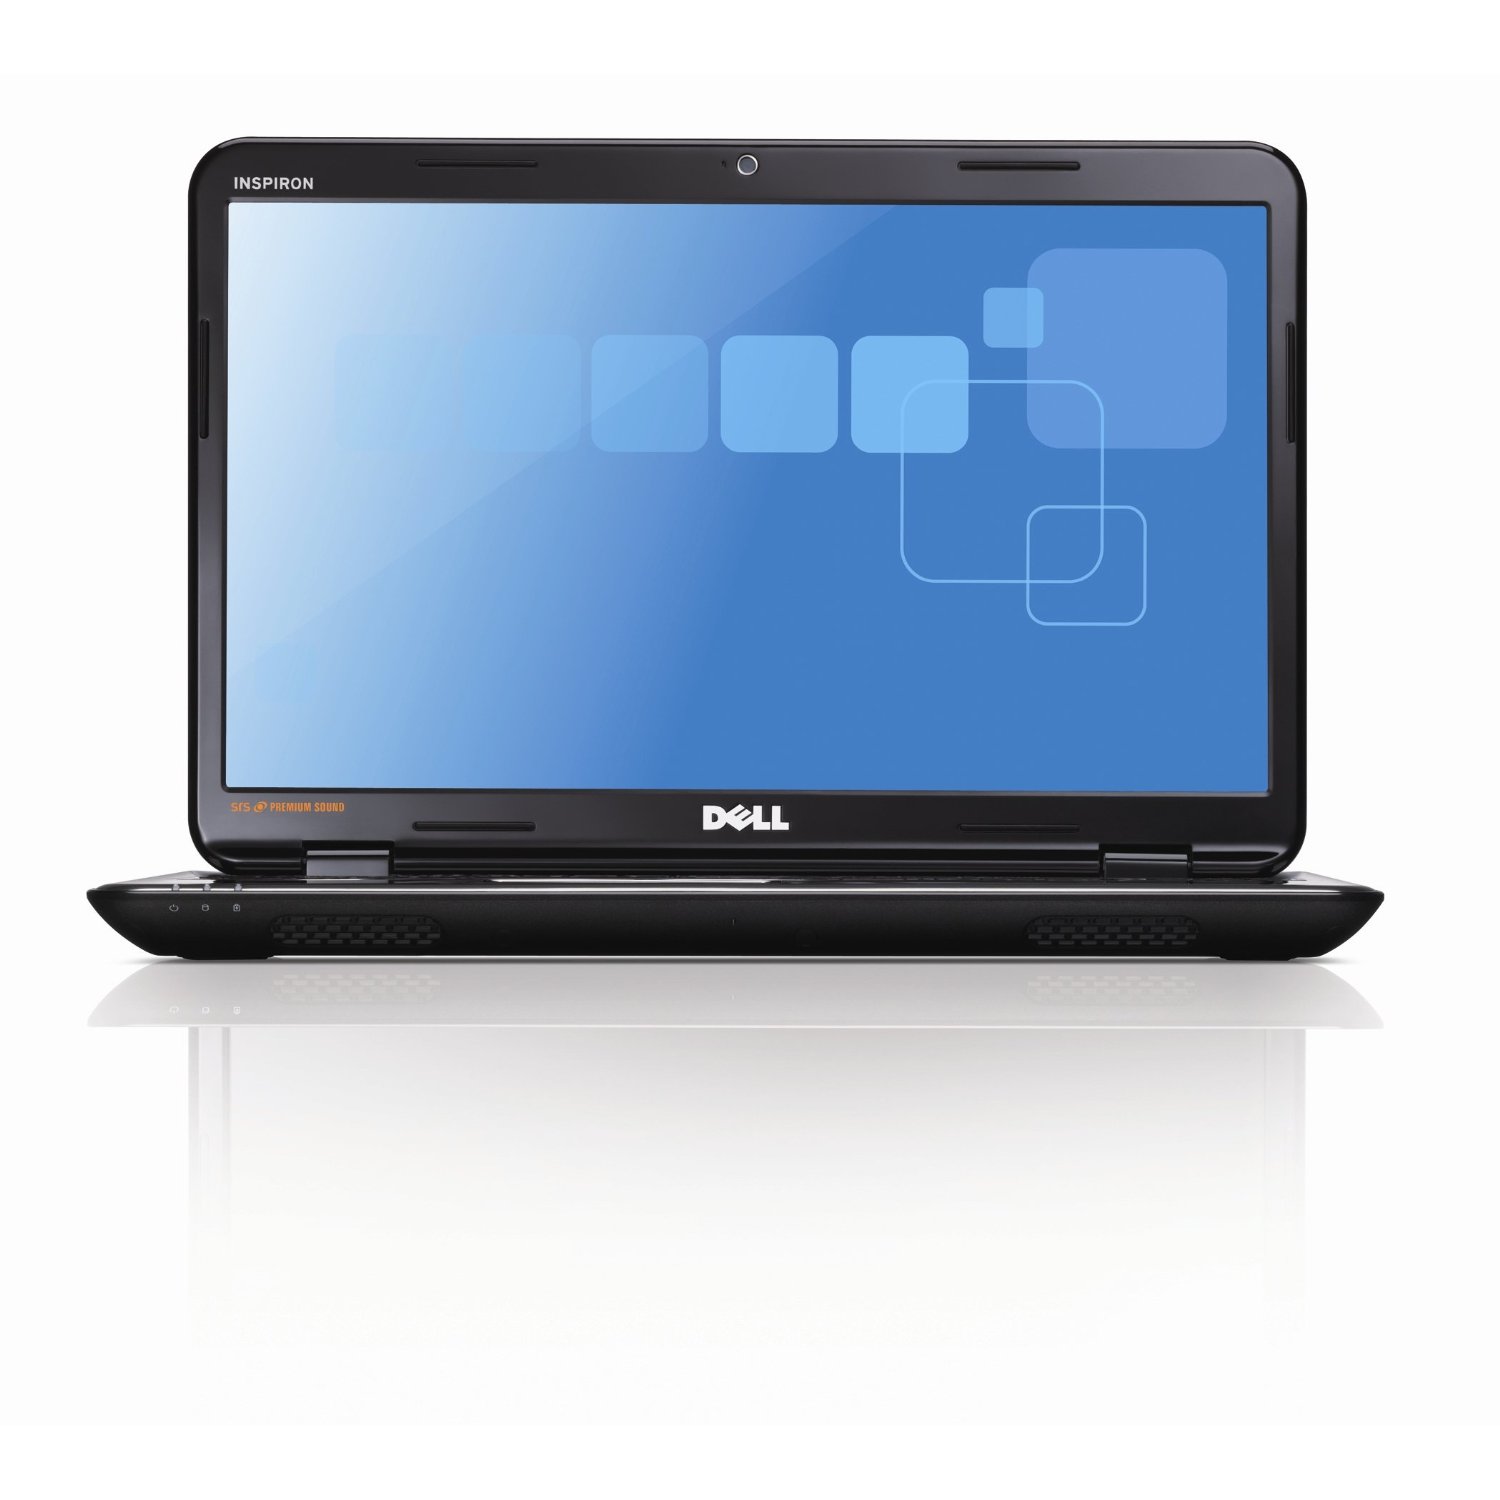 http://thetechjournal.com/wp-content/uploads/images/1110/1318421913-dell-inspiron-15r-i15rn51107223dbk-156inch-laptop-1.jpg